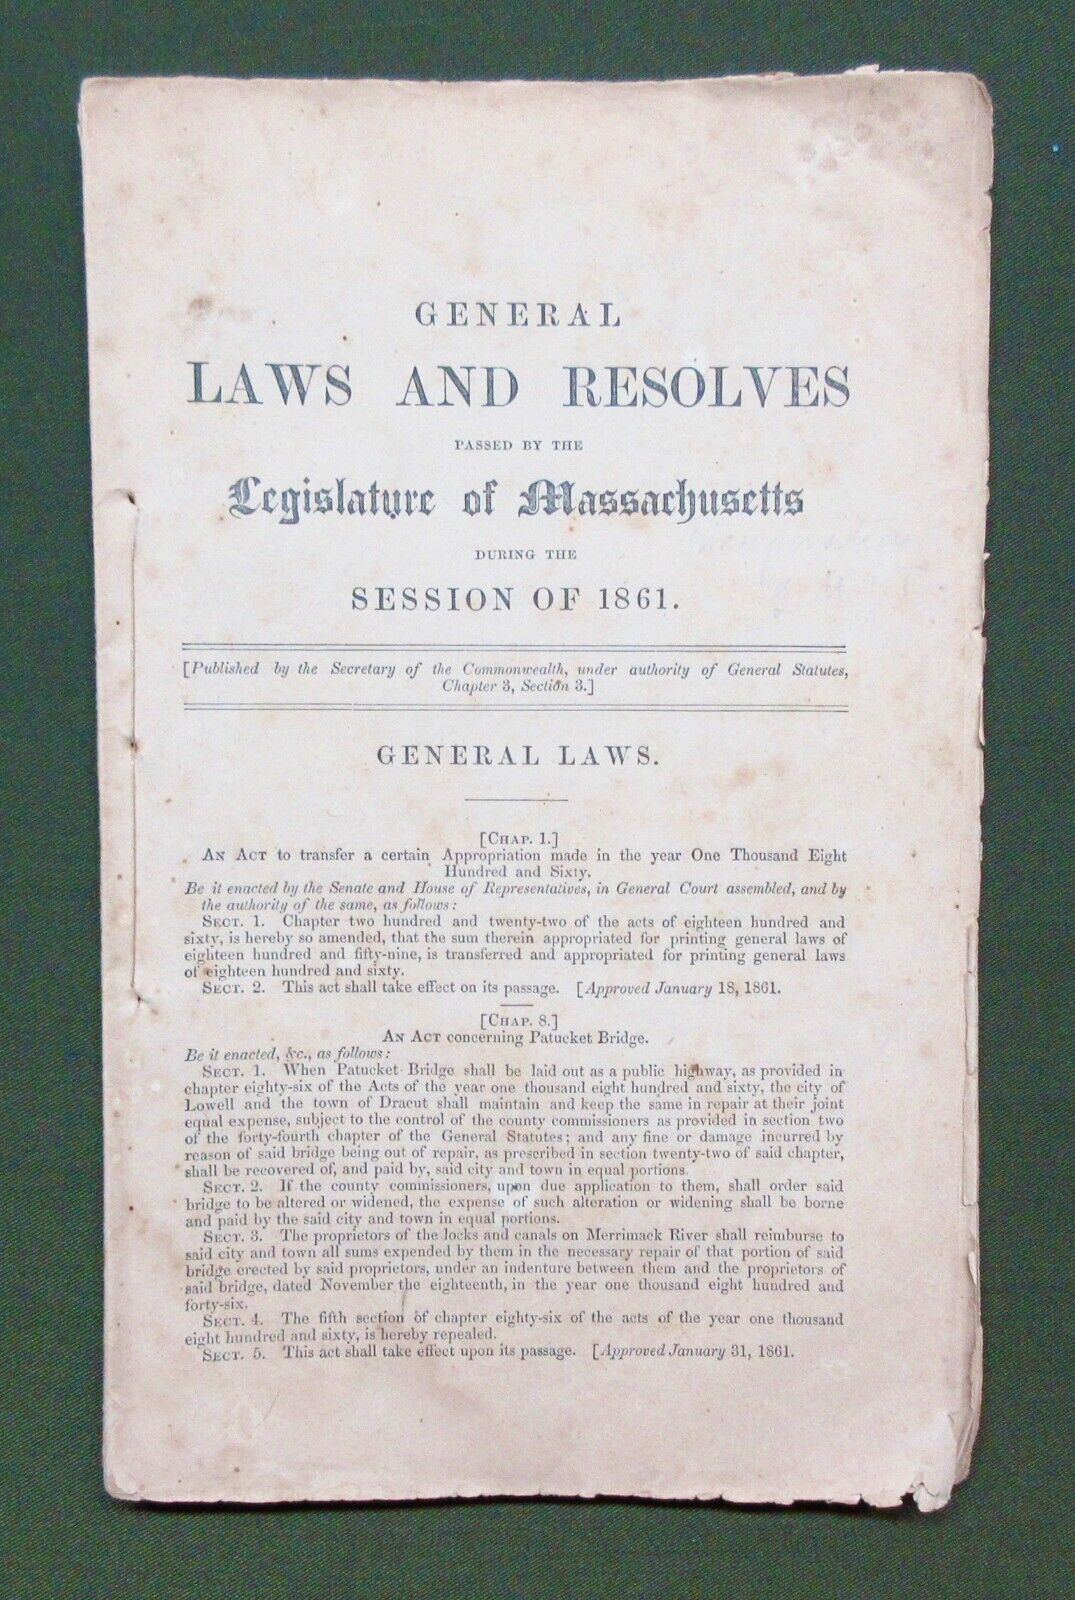 1861 General Laws And Resolves- Passed By The Legislature of Massachusetts.